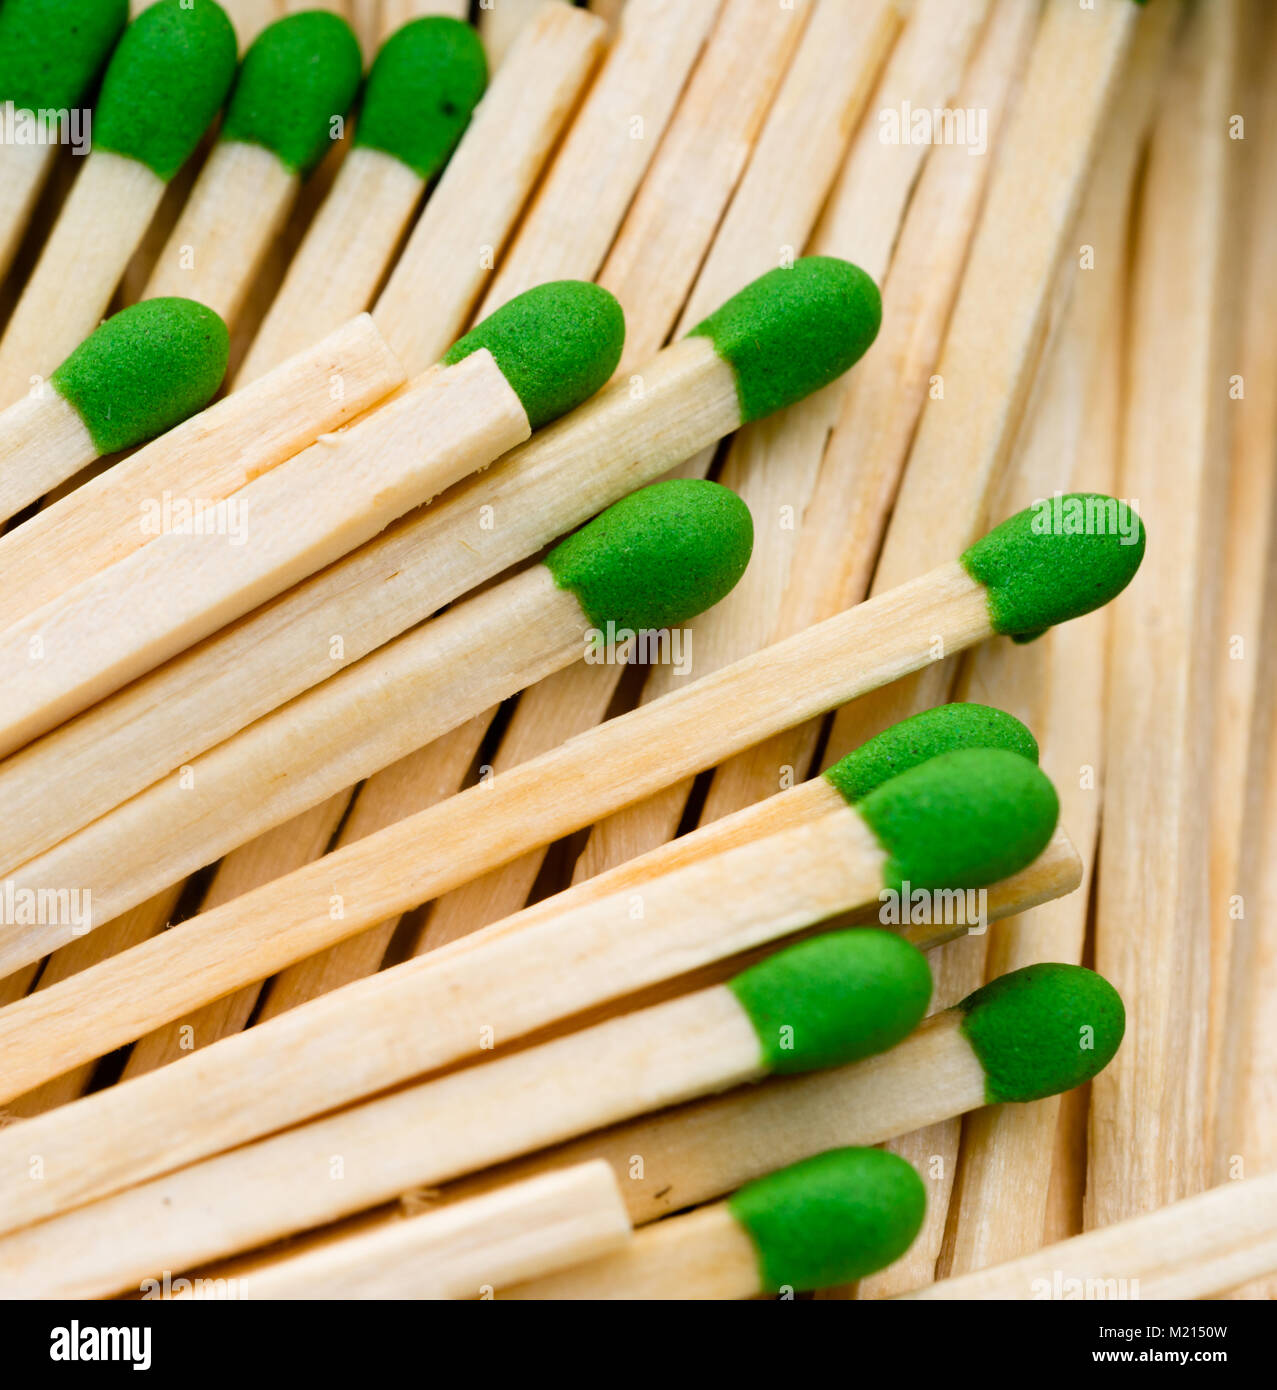 Matchsticks Free Stock Photos, Images, and Pictures of Matchsticks